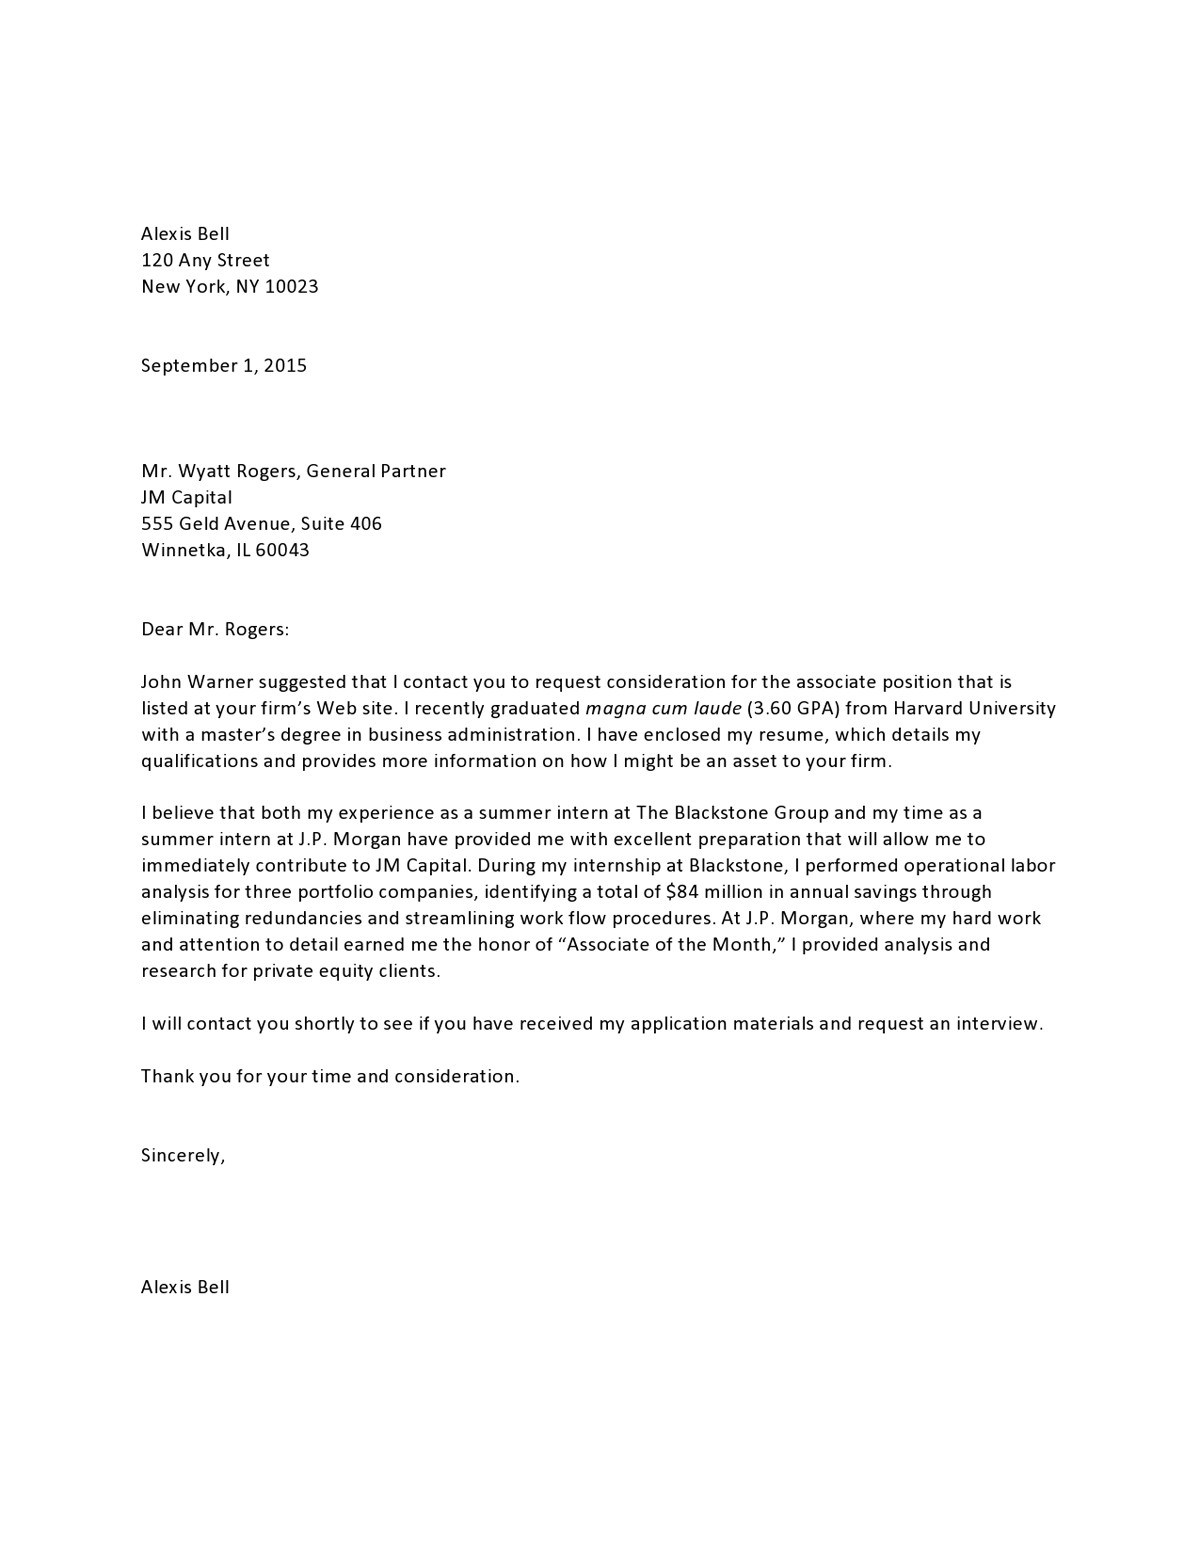 private equity entry level referral cover letter